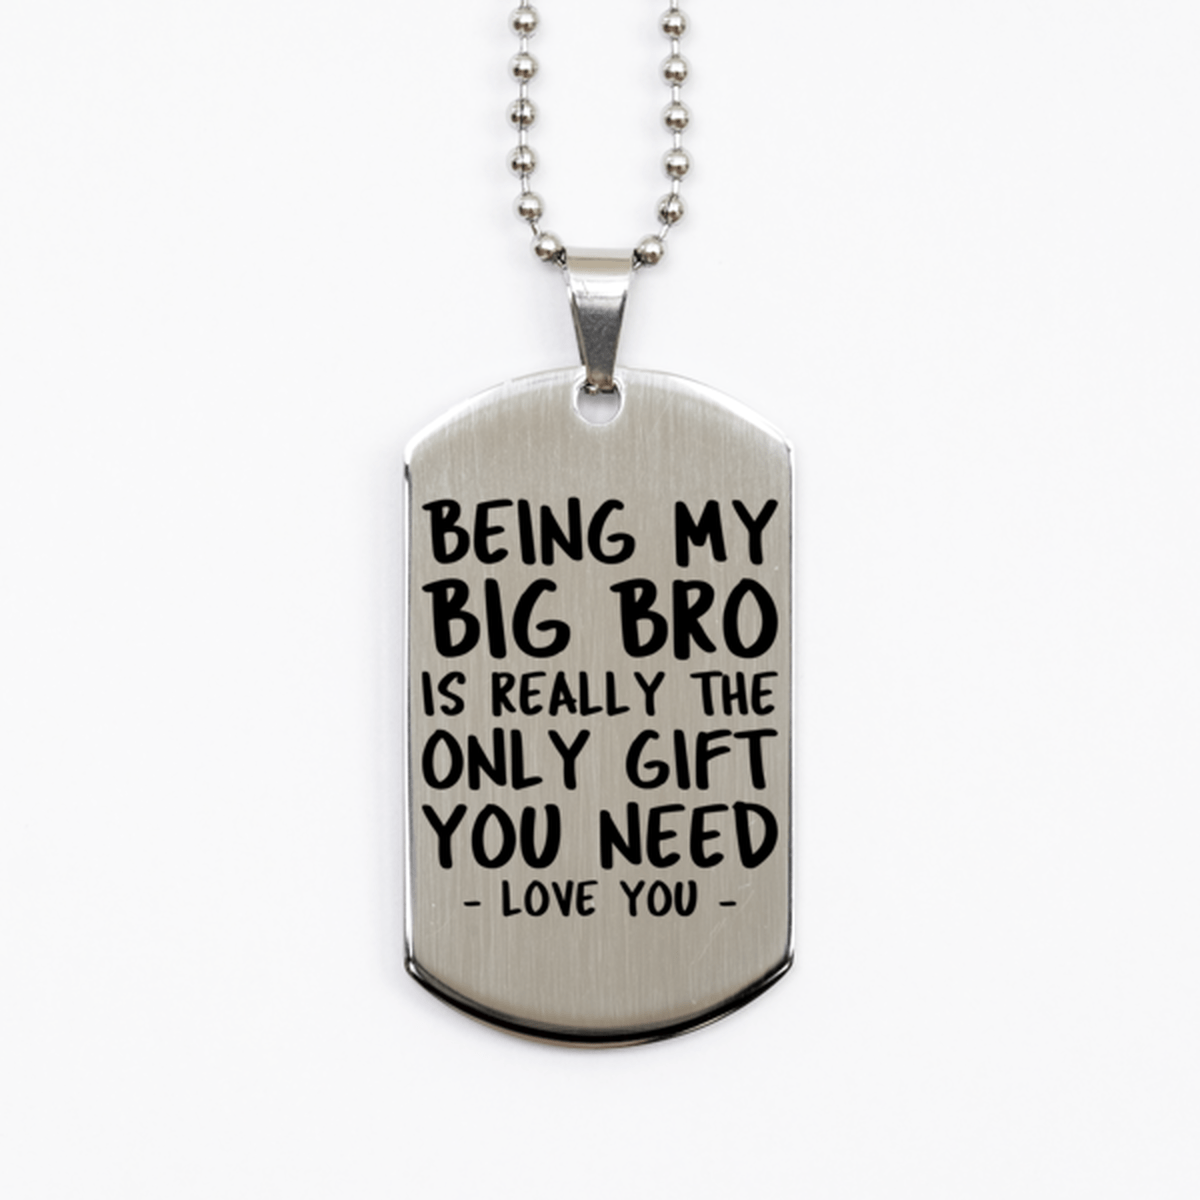 Funny Big Bro Silver Dog Tag Necklace, Being My Big Bro Is Really the Only Gift You Need, Best Birthday Gifts for Big Bro